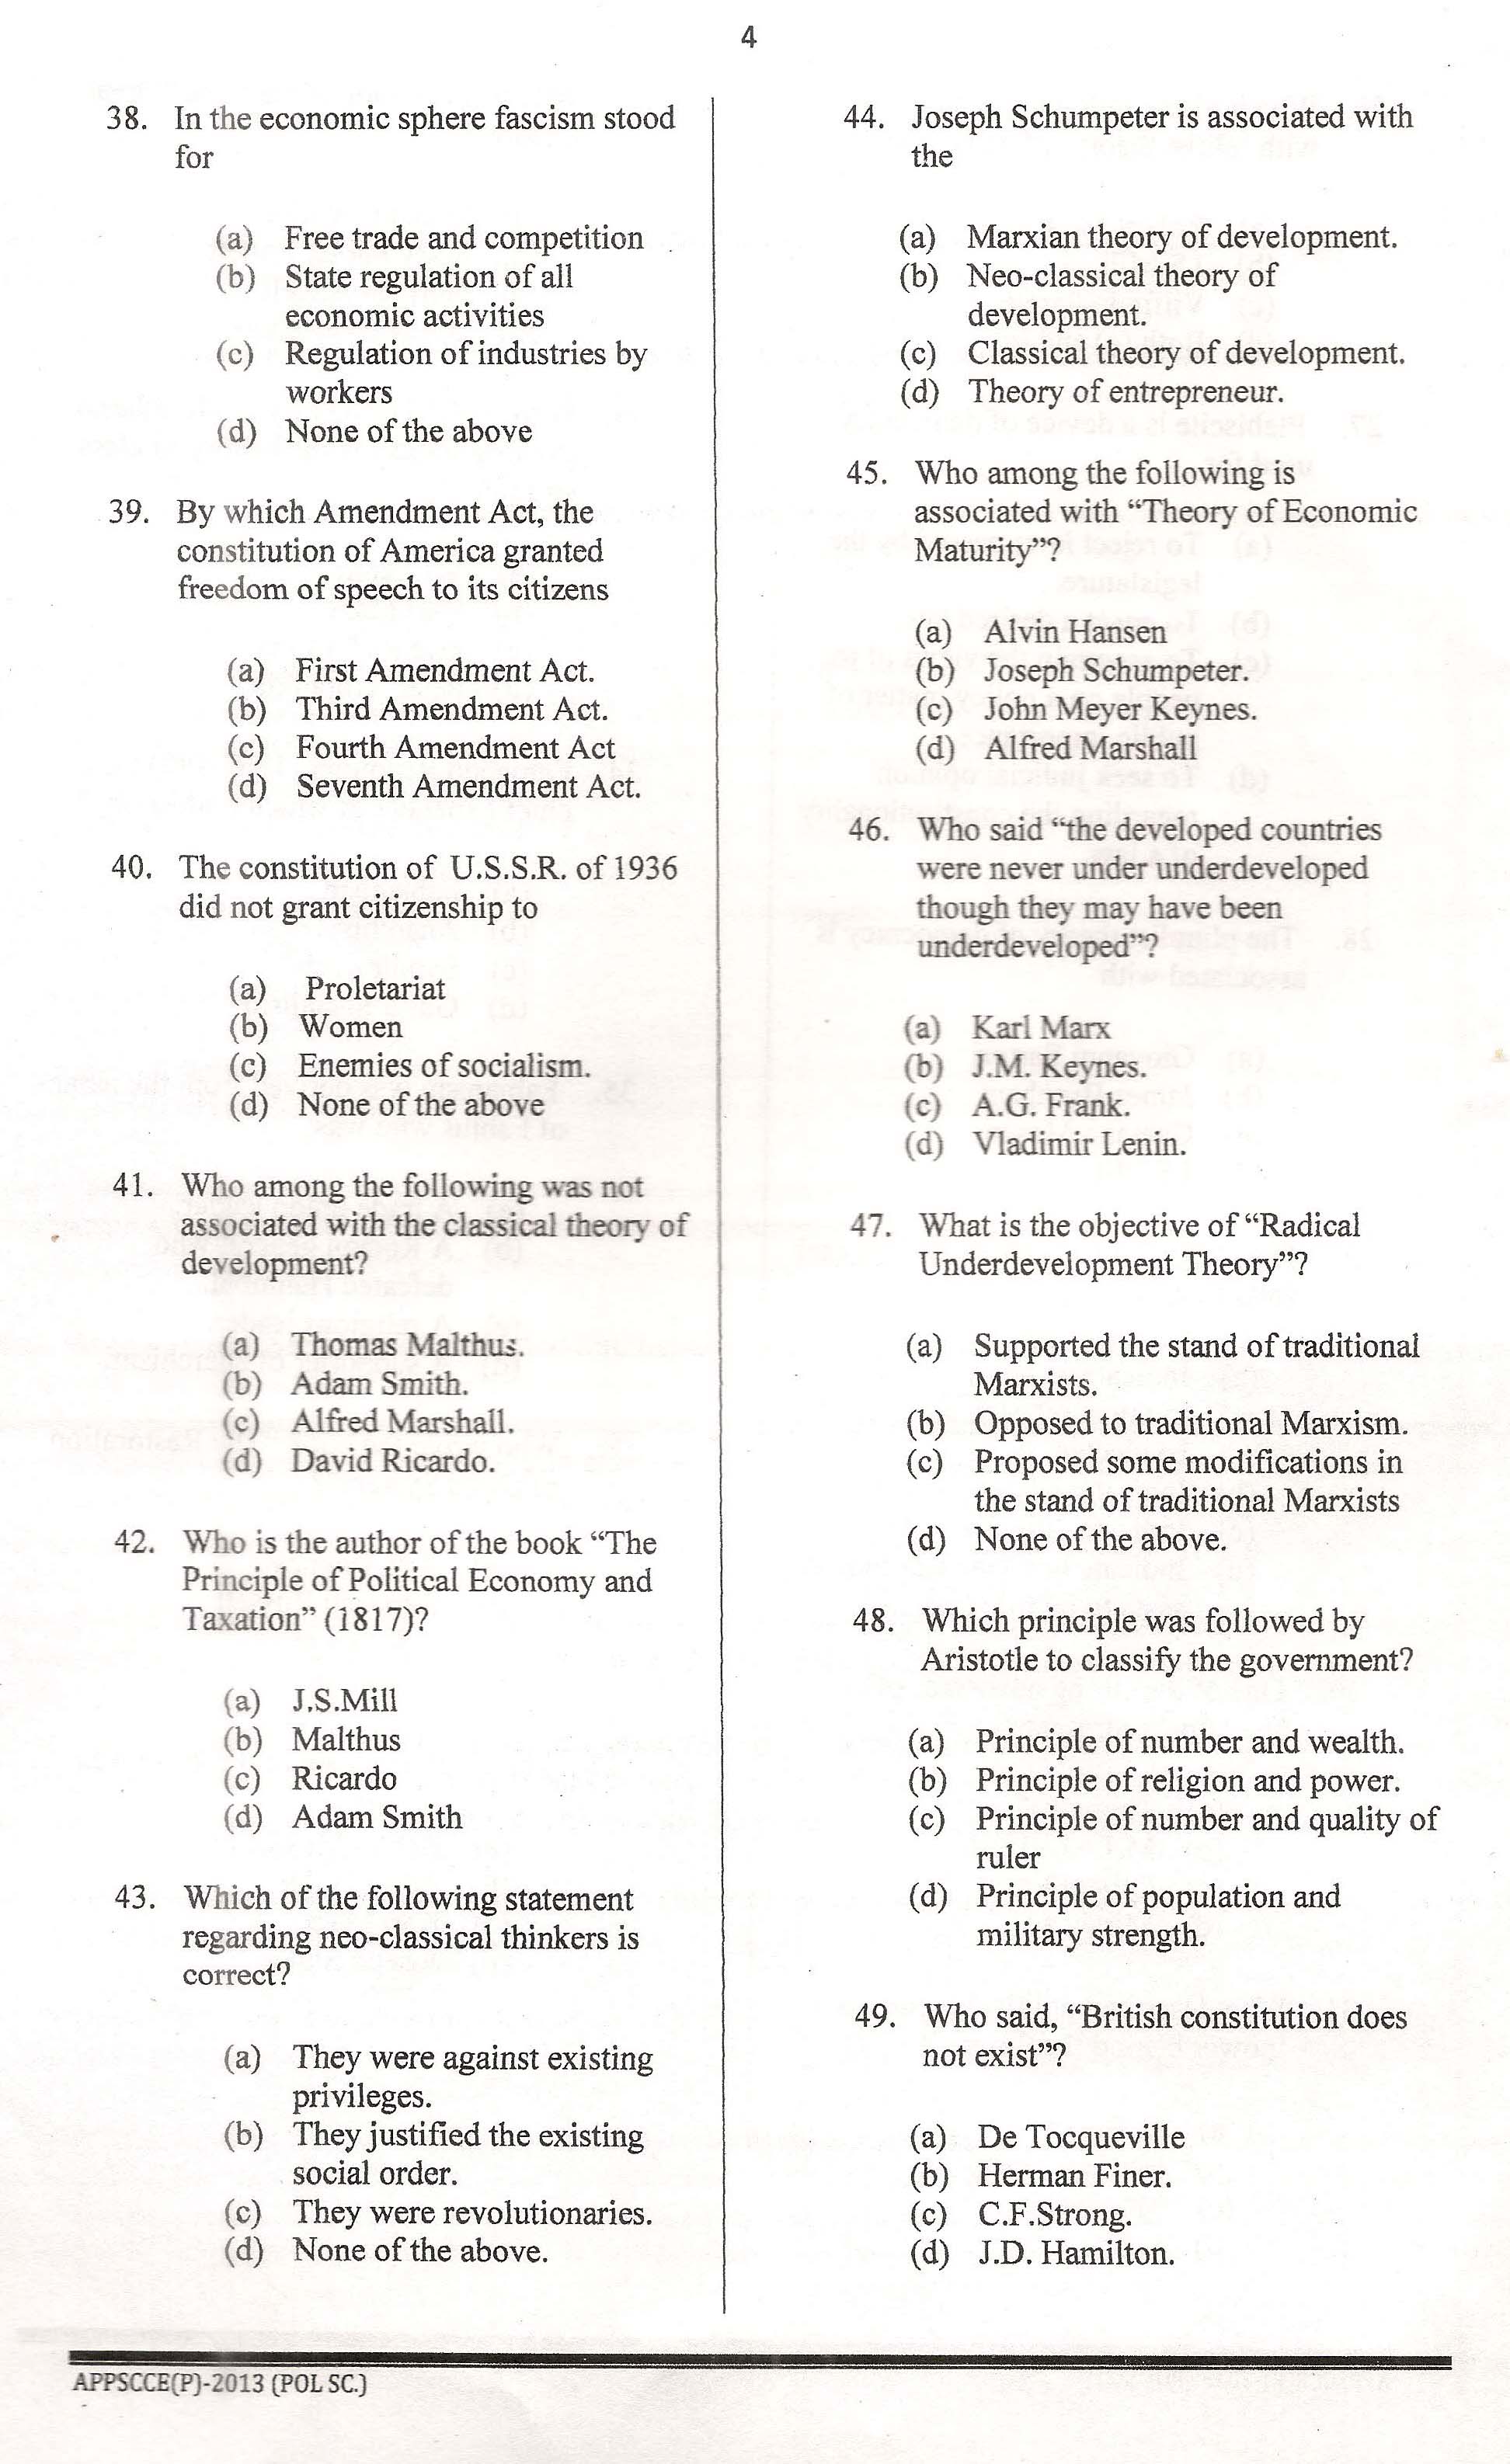 APPSC Combined Competitive Prelims Exam 2013 Political Science 5